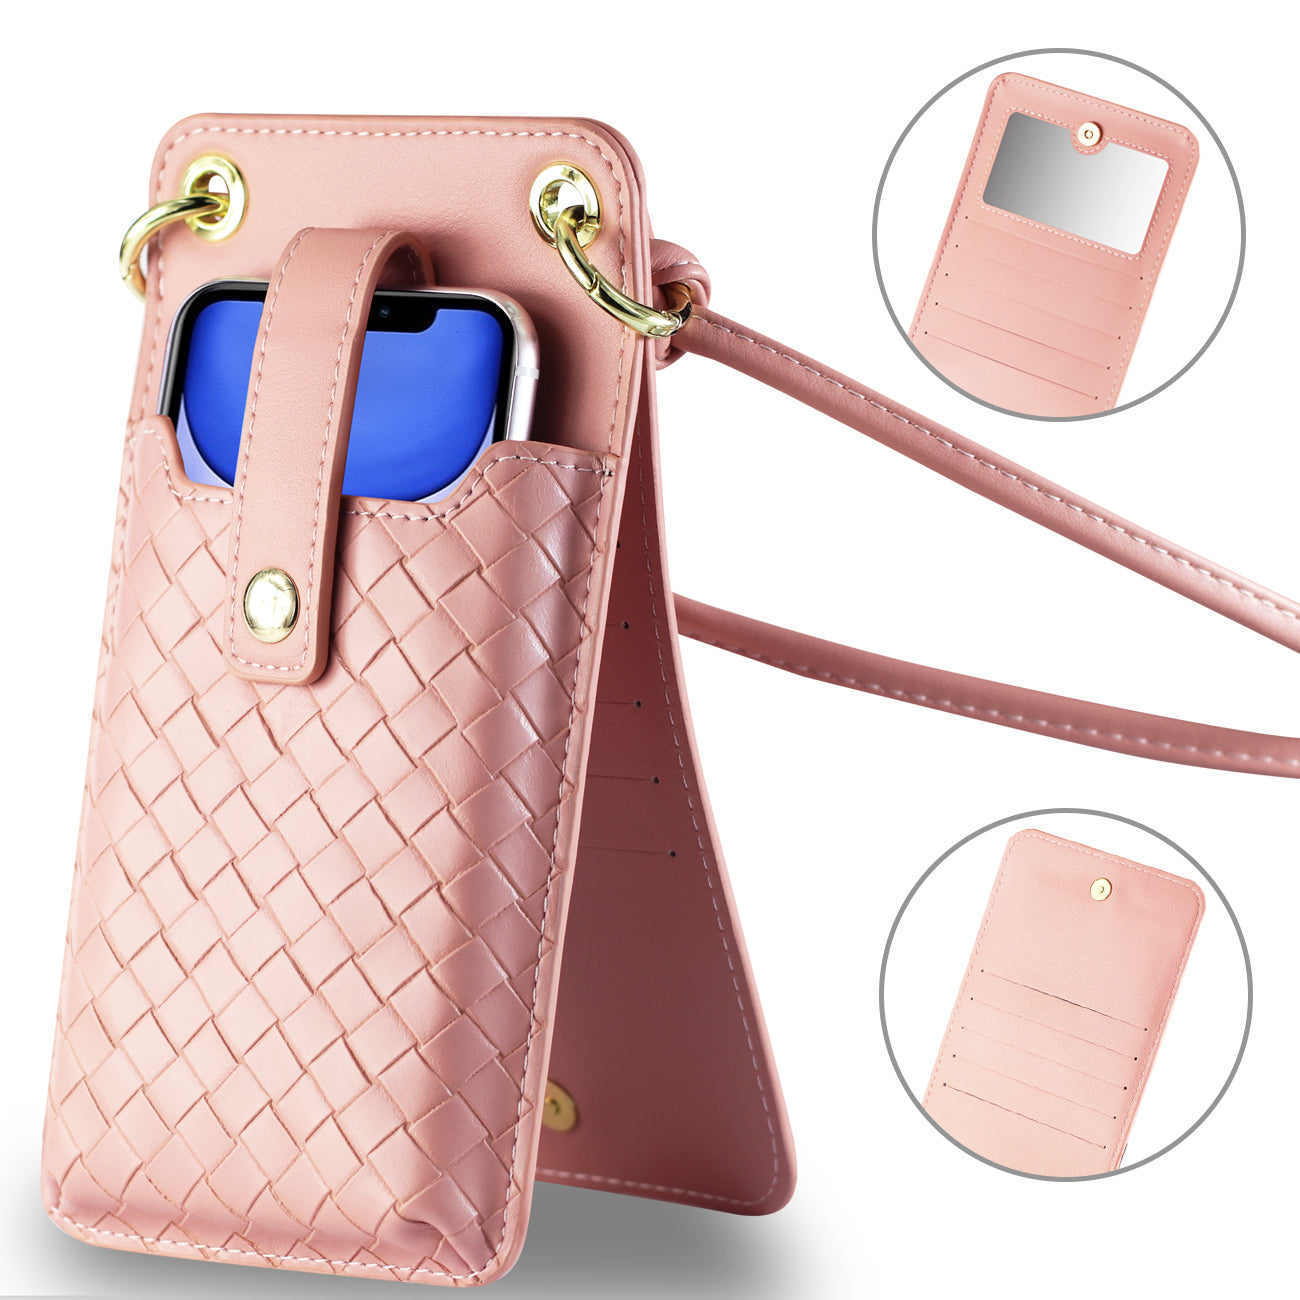 Reiko Leather Crossbody Phone Wallet Small Purse In Pink